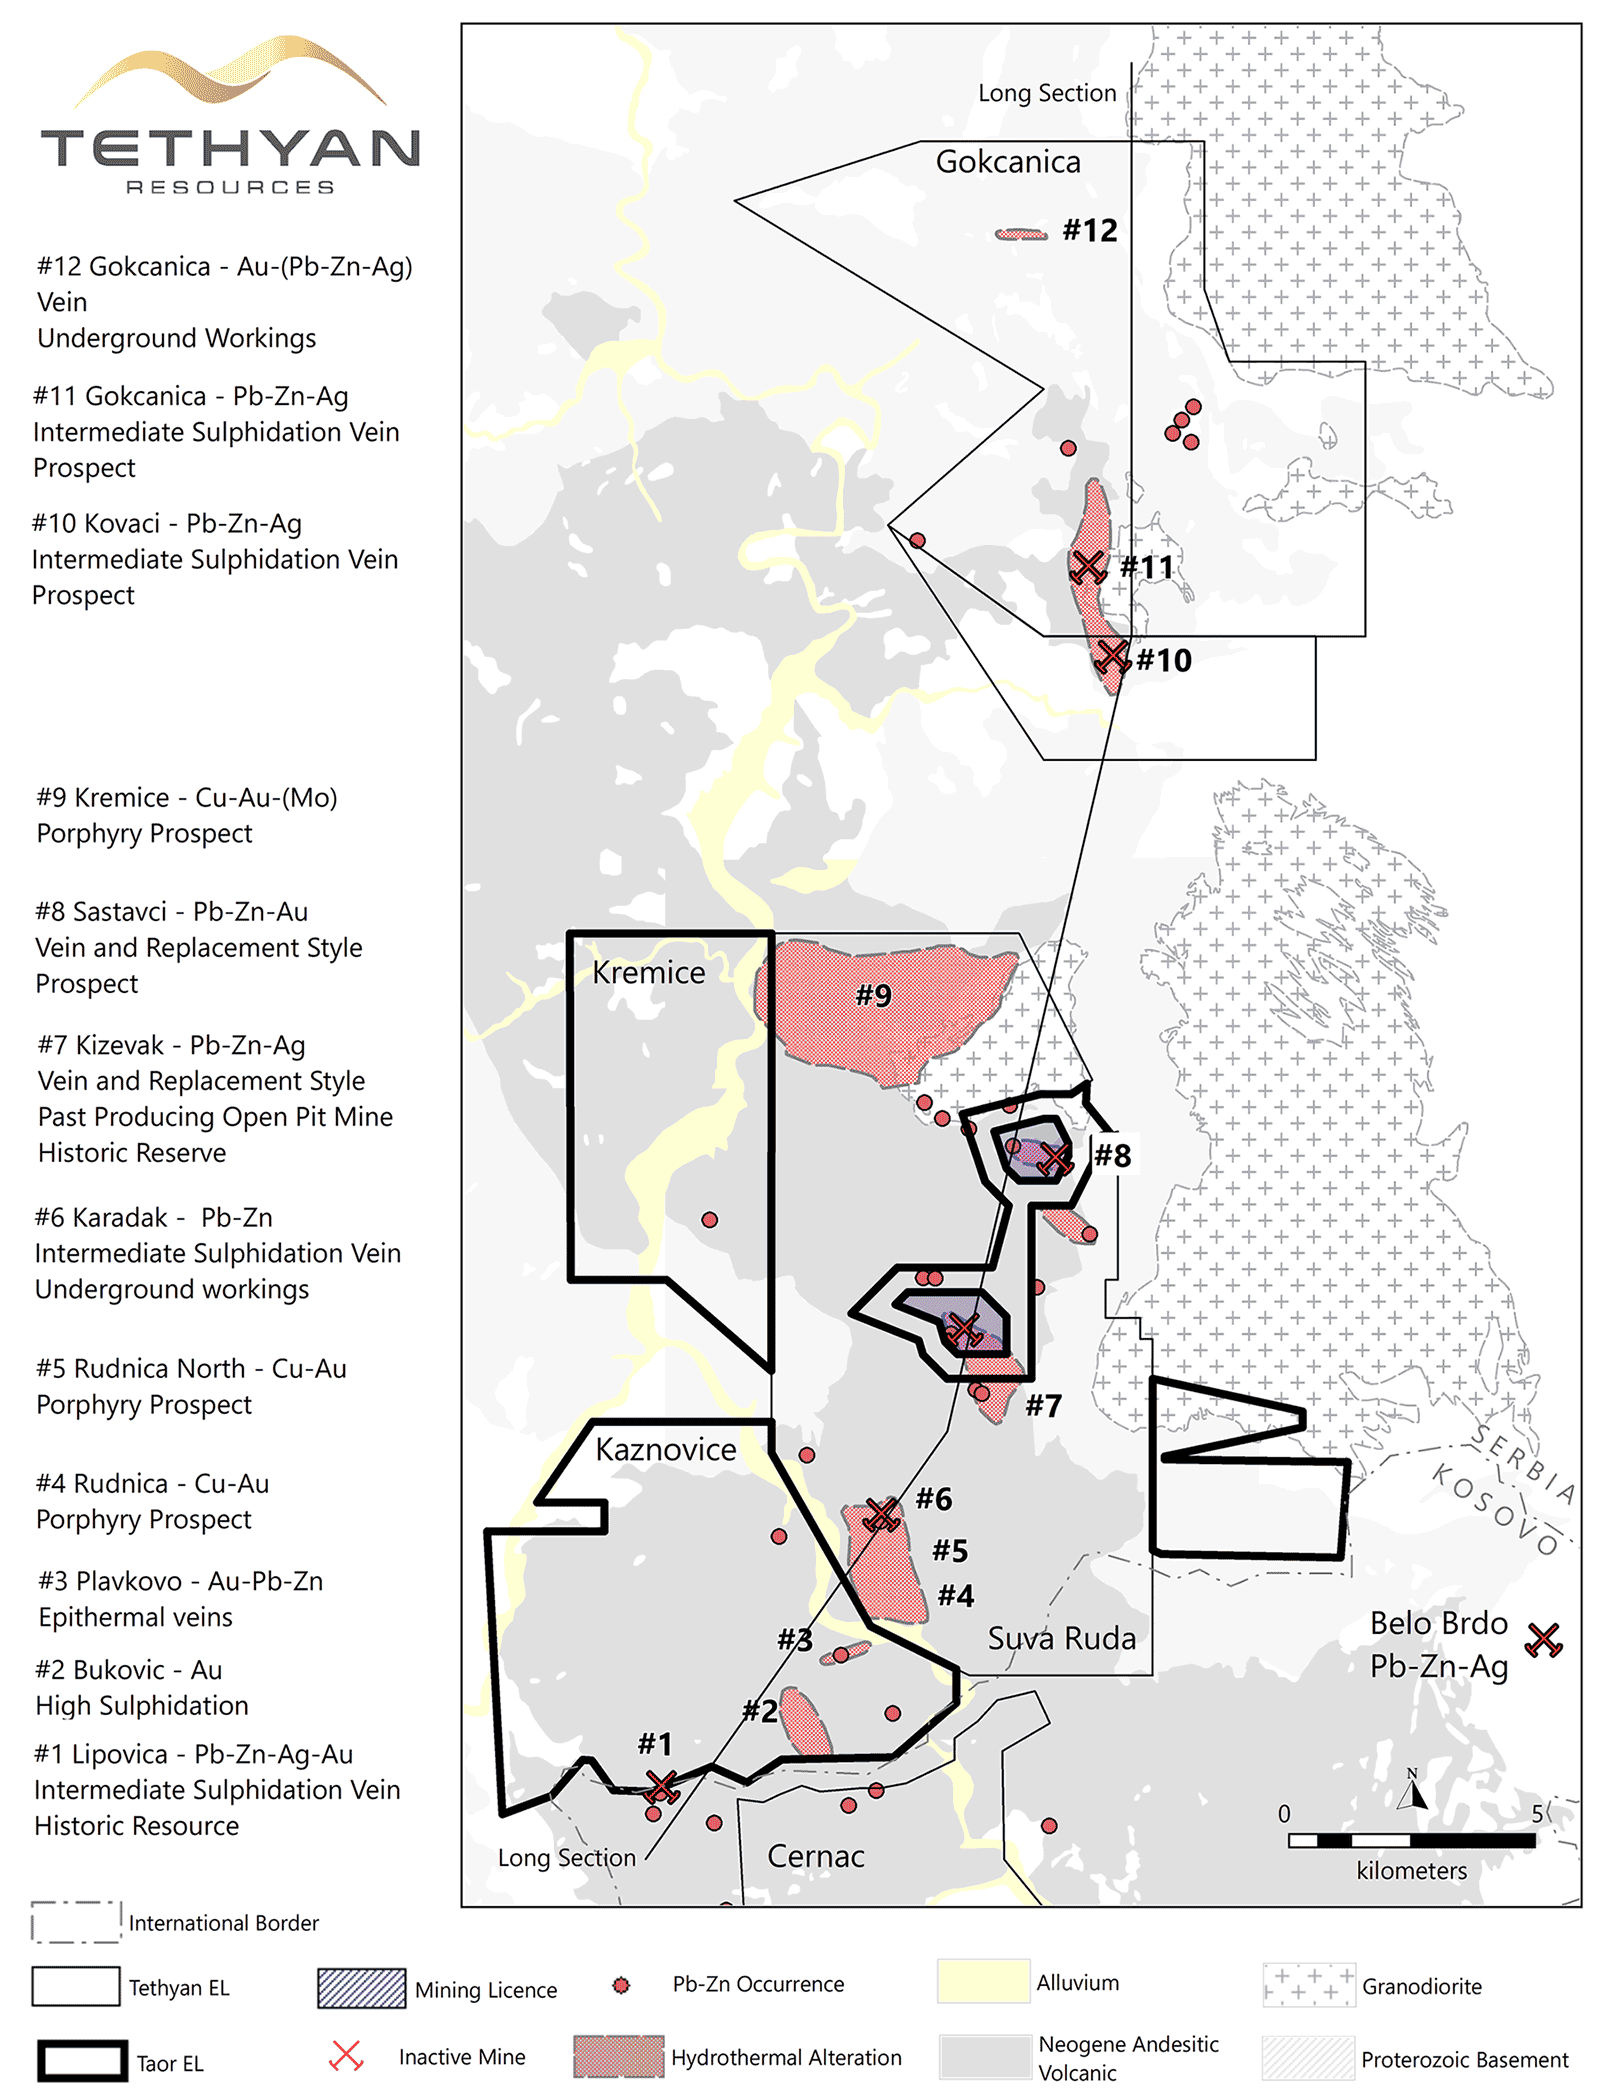 District scale map of the Raška lead and zinc mining district in Southern Serbia where Tethyan is consolidating exploration license holdings. Also shown are the multiple known exploration targets and historical mines.